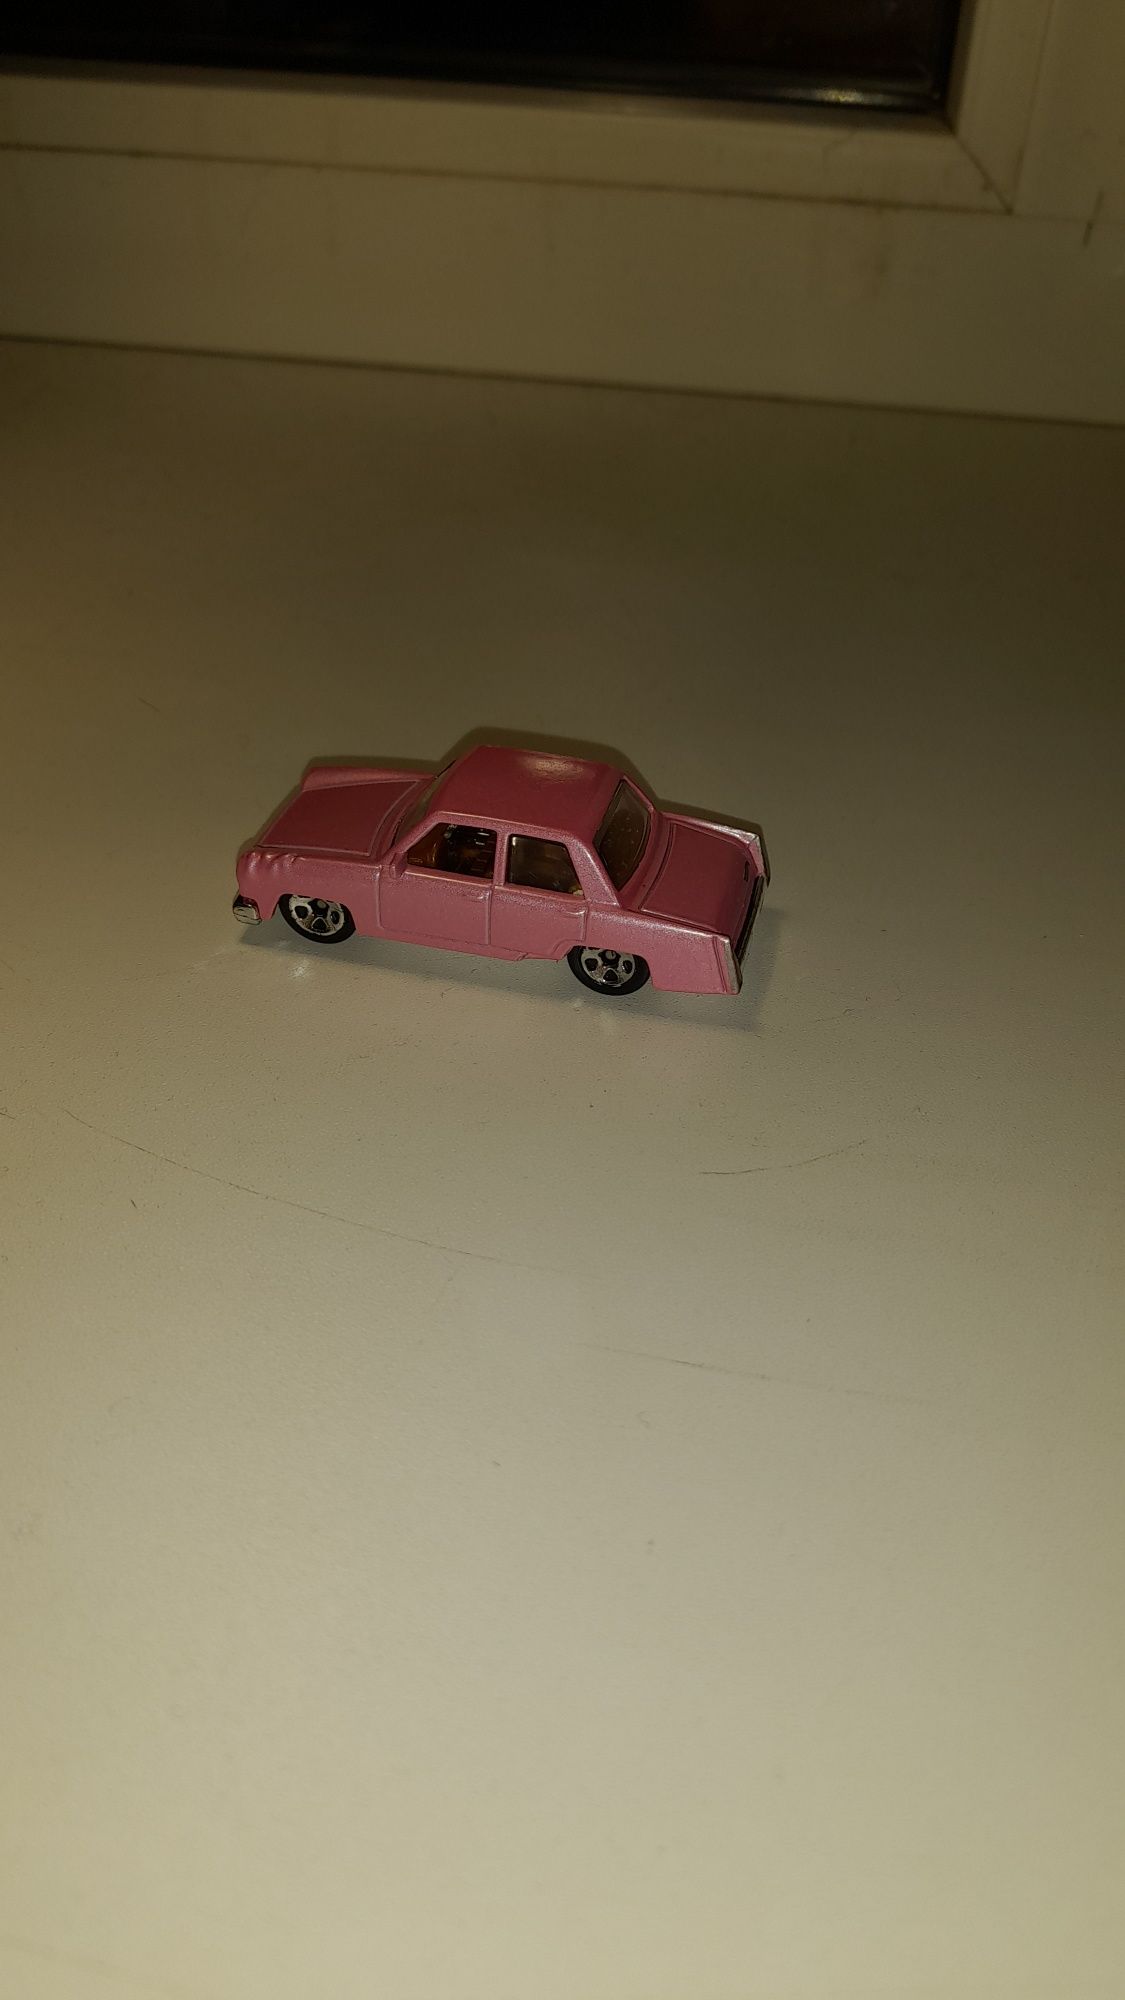 Hot Wheels The Simpson's Family Car Pink 2015